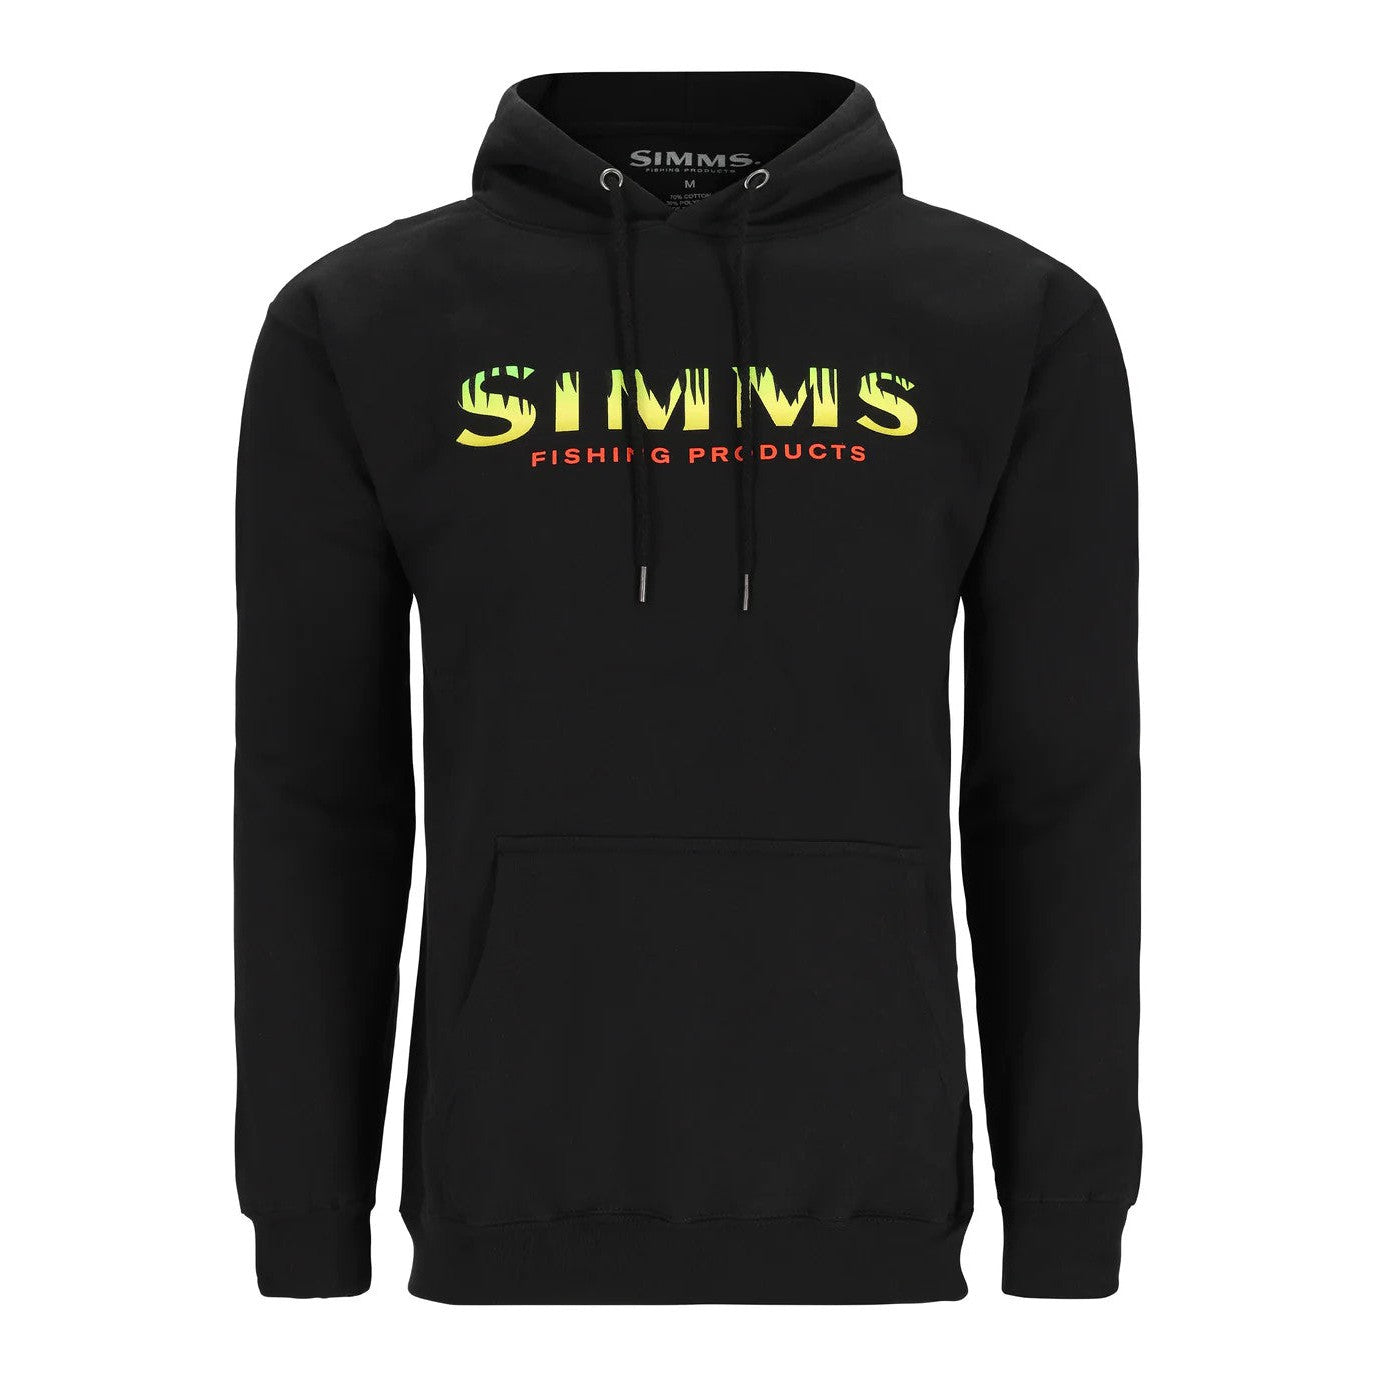 View of Hoodies-Sweatshirts M's Simms Logo Hoody M Charcoal Heather available at EZOKO Pike and Musky Shop